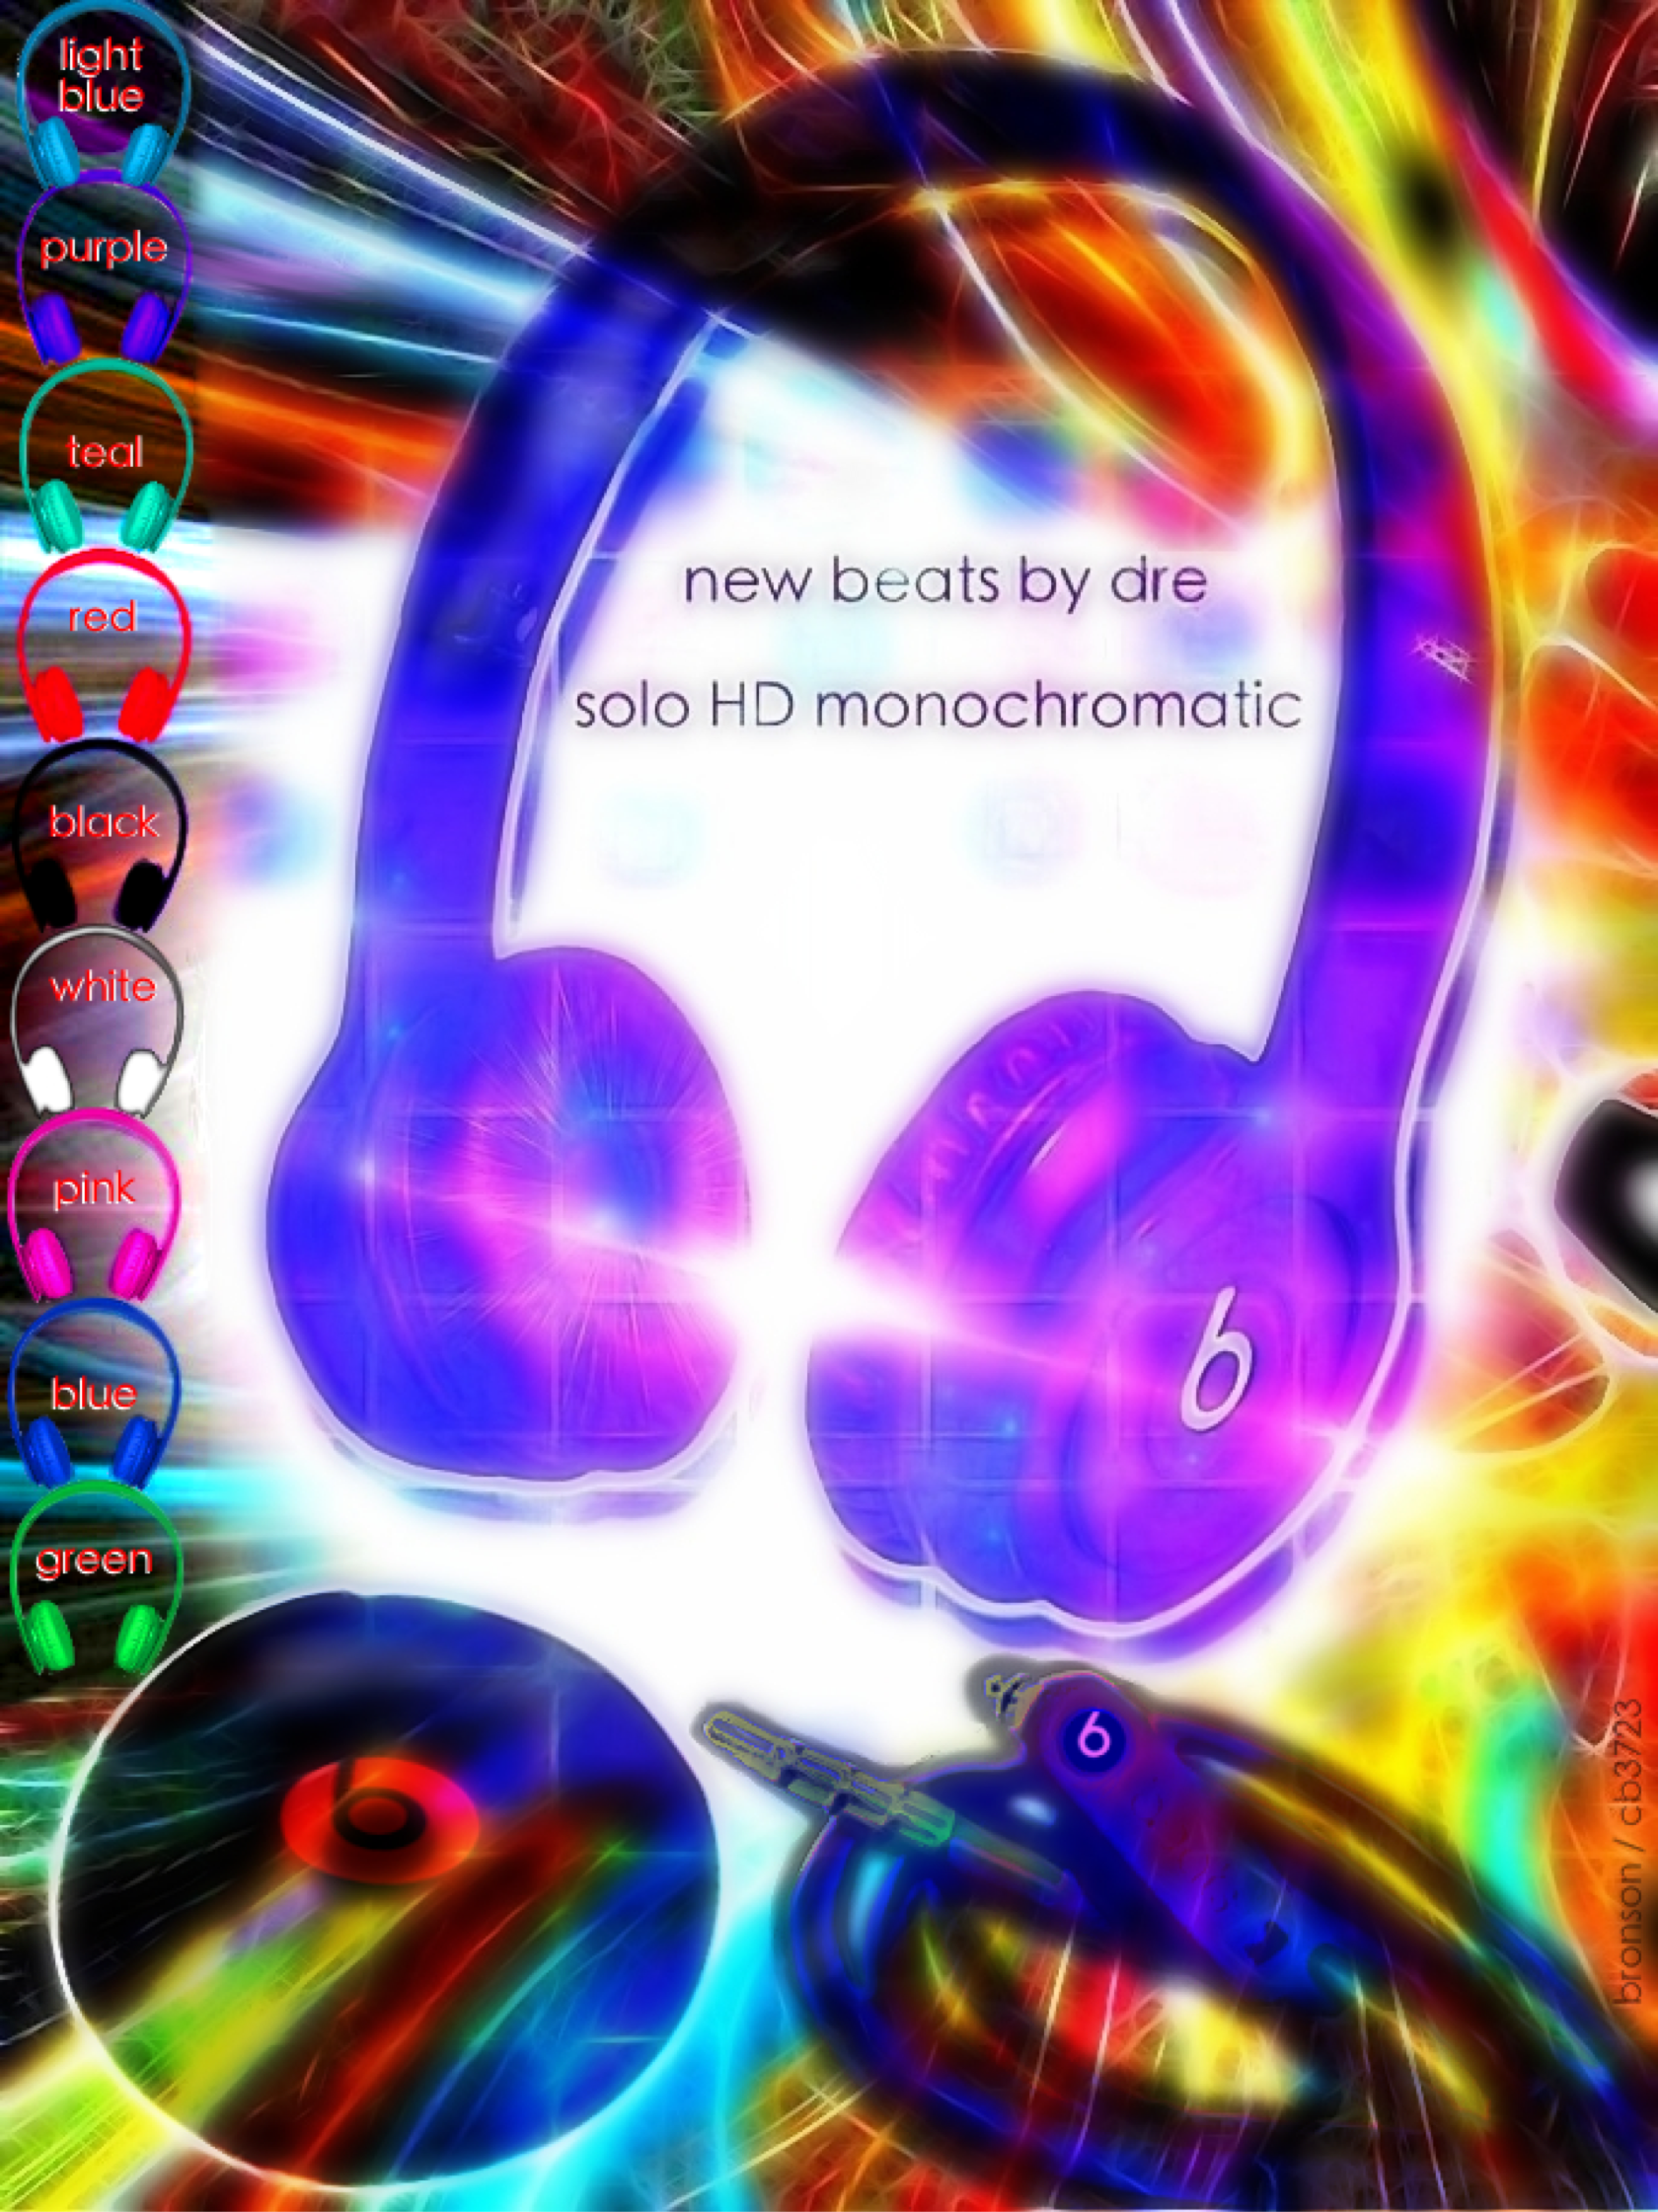 beats_by_dr_dre_solo_hd_monochromatic_headphones_by_cb3723-d6v57ip.png